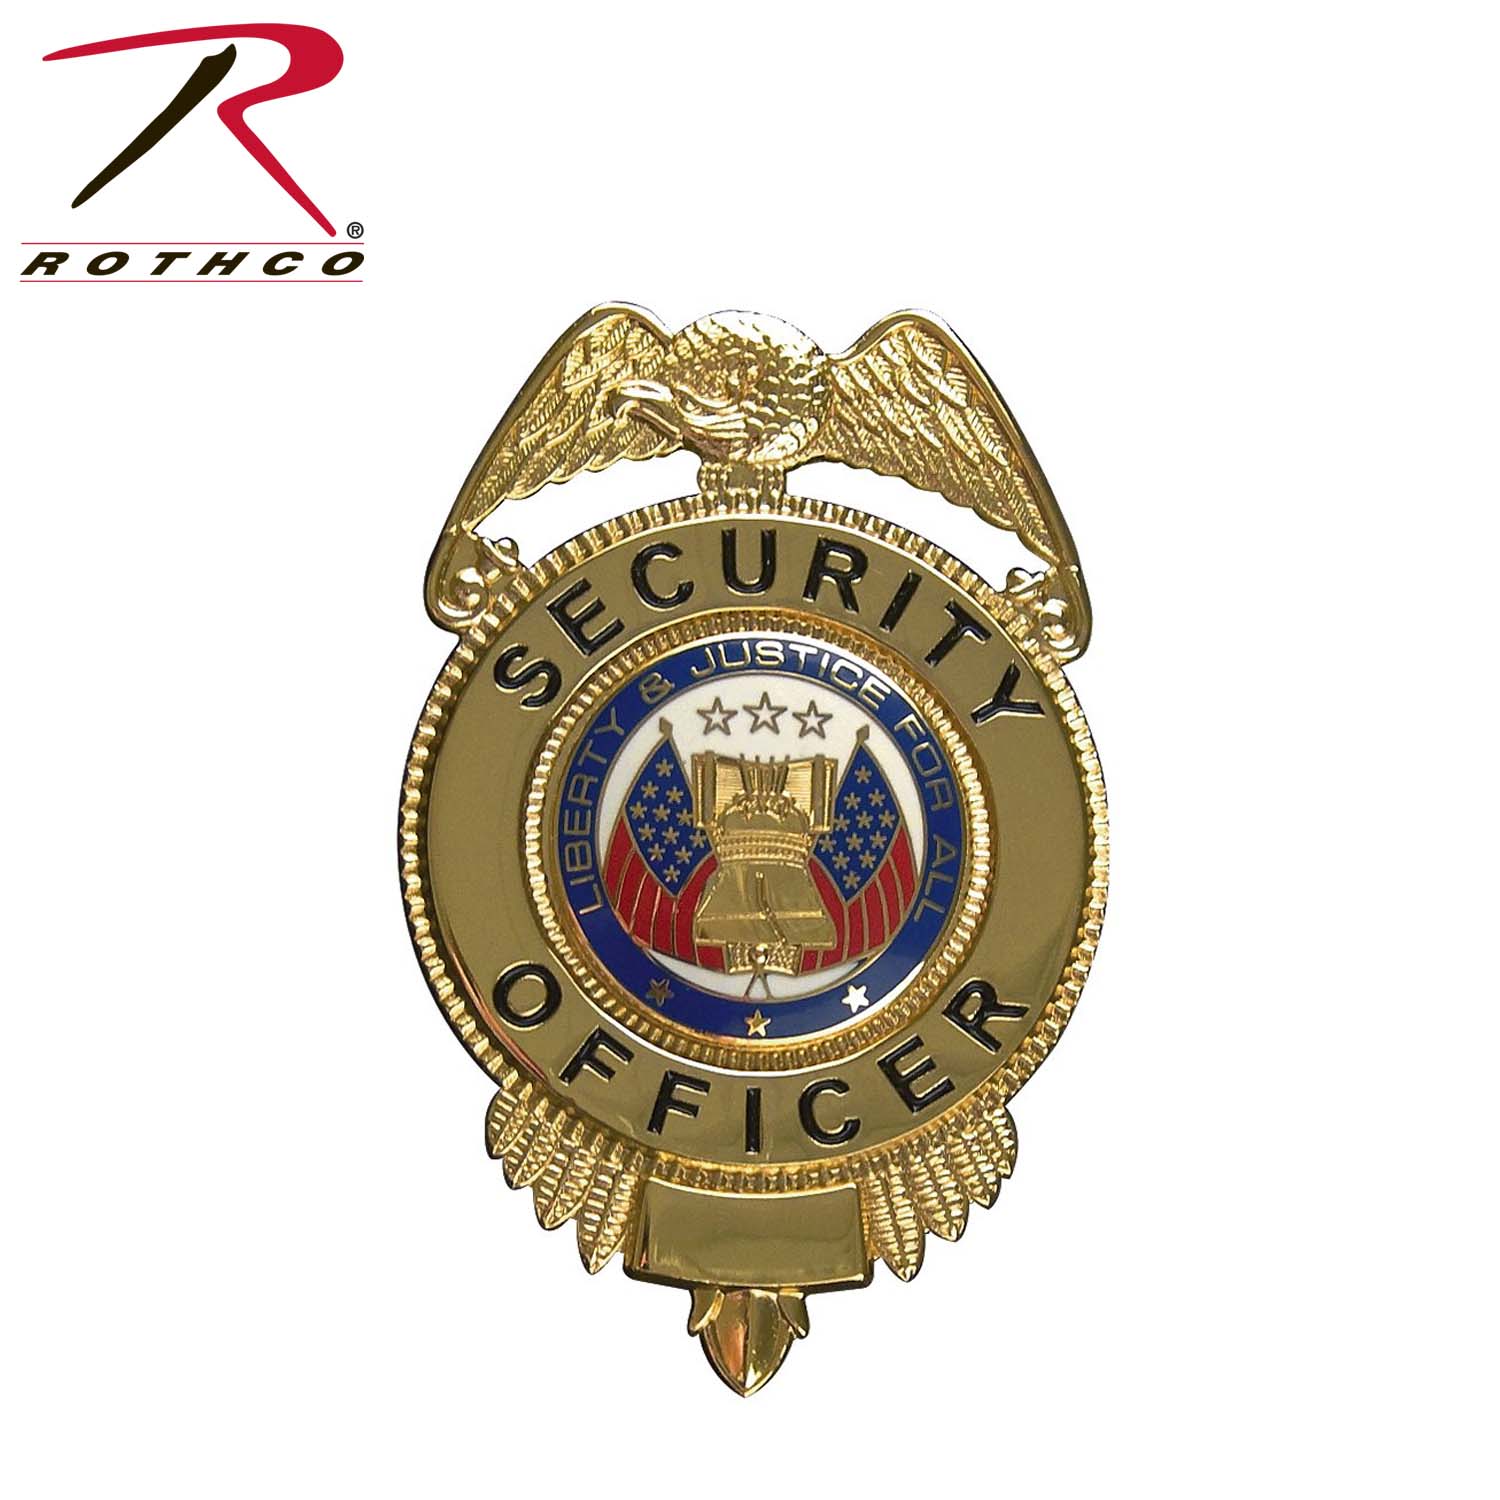 Security Officer Badge Clip Art Security Officer Badge Clipart   Free    